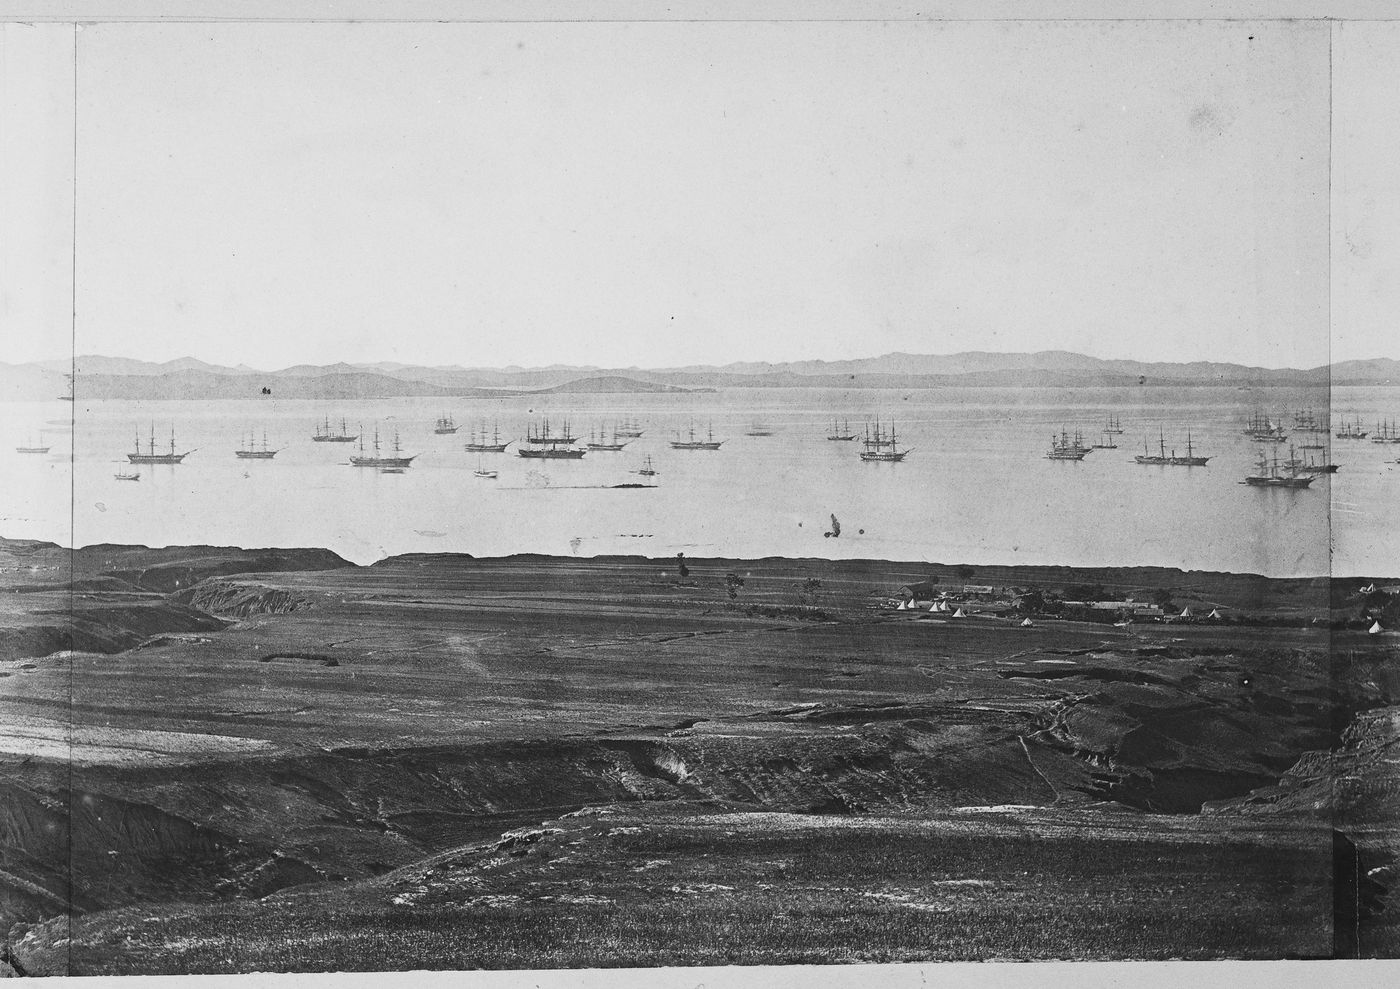 View of Victoria Bay, adjacent to Talien Bay (now Dalian Wan), showing military camps and farmland, near Ch'ing-ni-wa (now part of Dalian), China